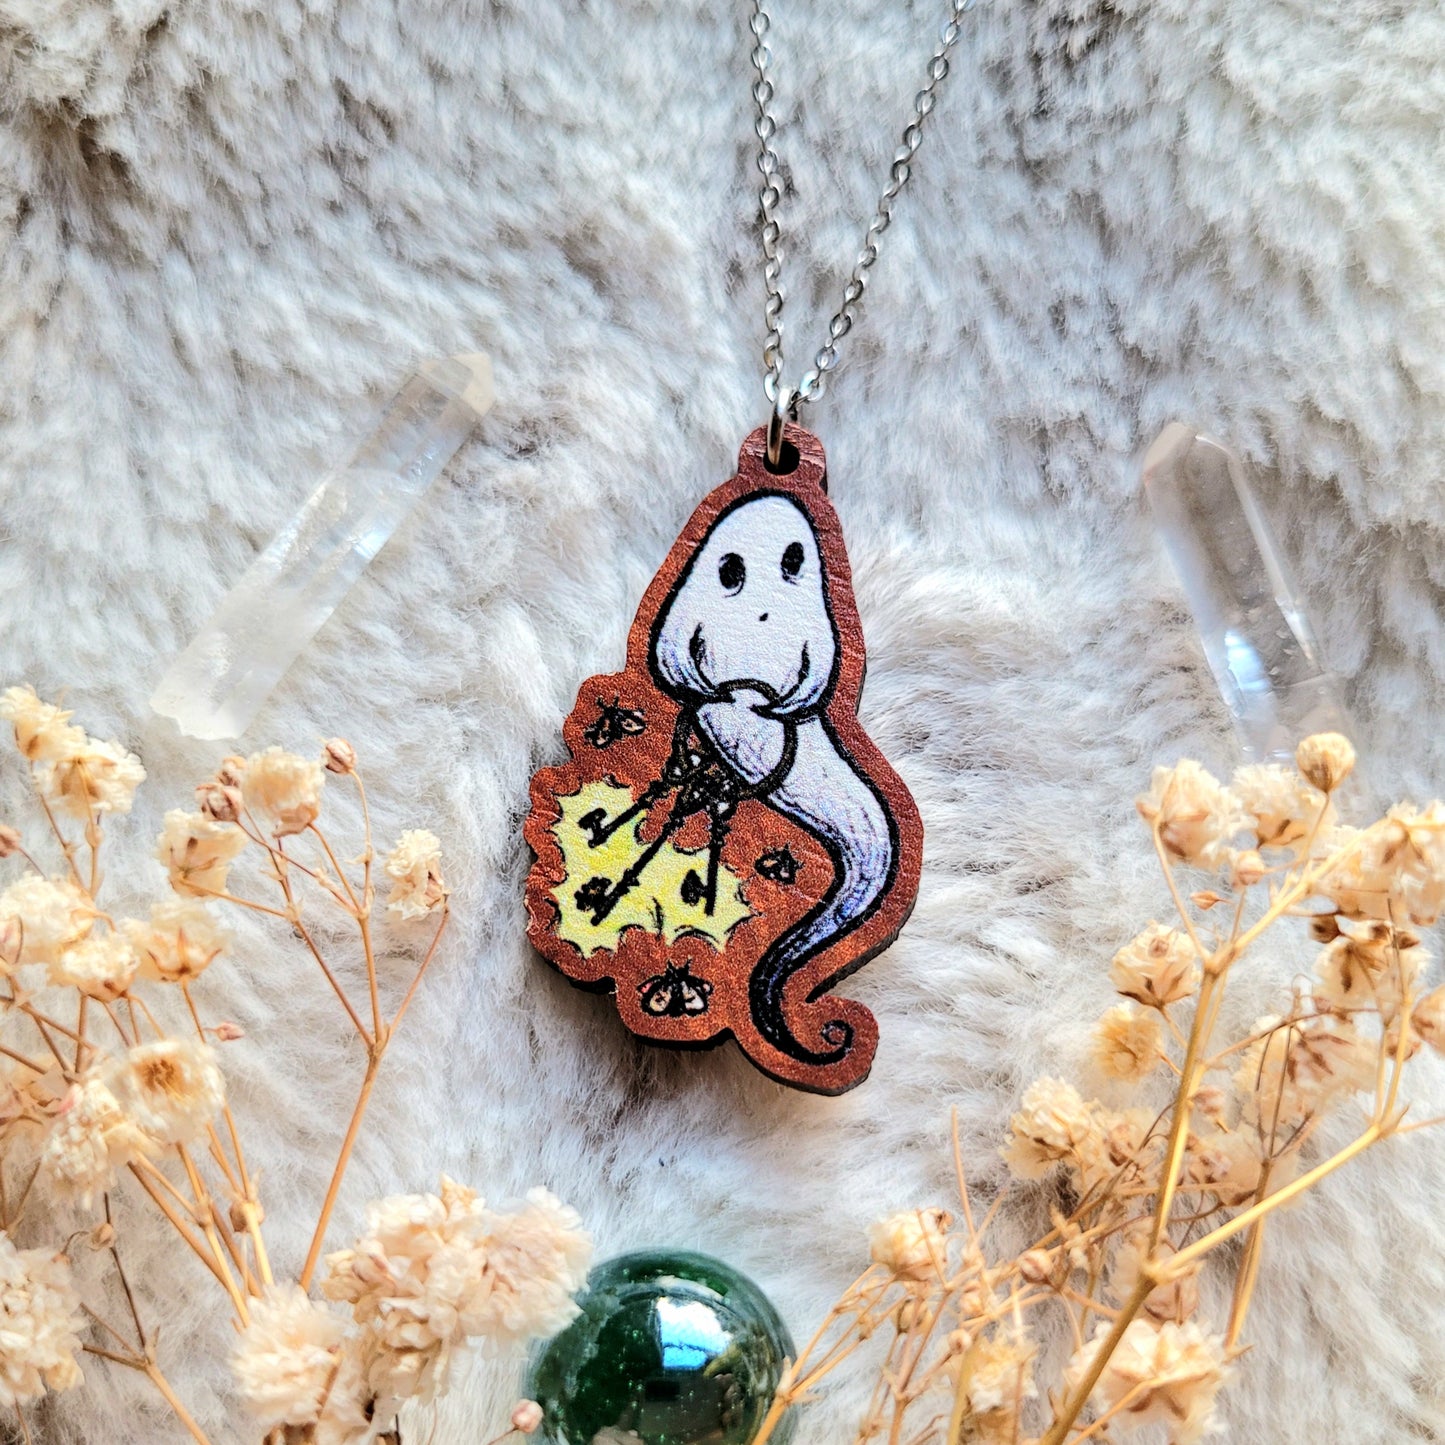 Ghostie illustrated necklace, responsibly sourced cherry wood, chain options available, by Grace Moth